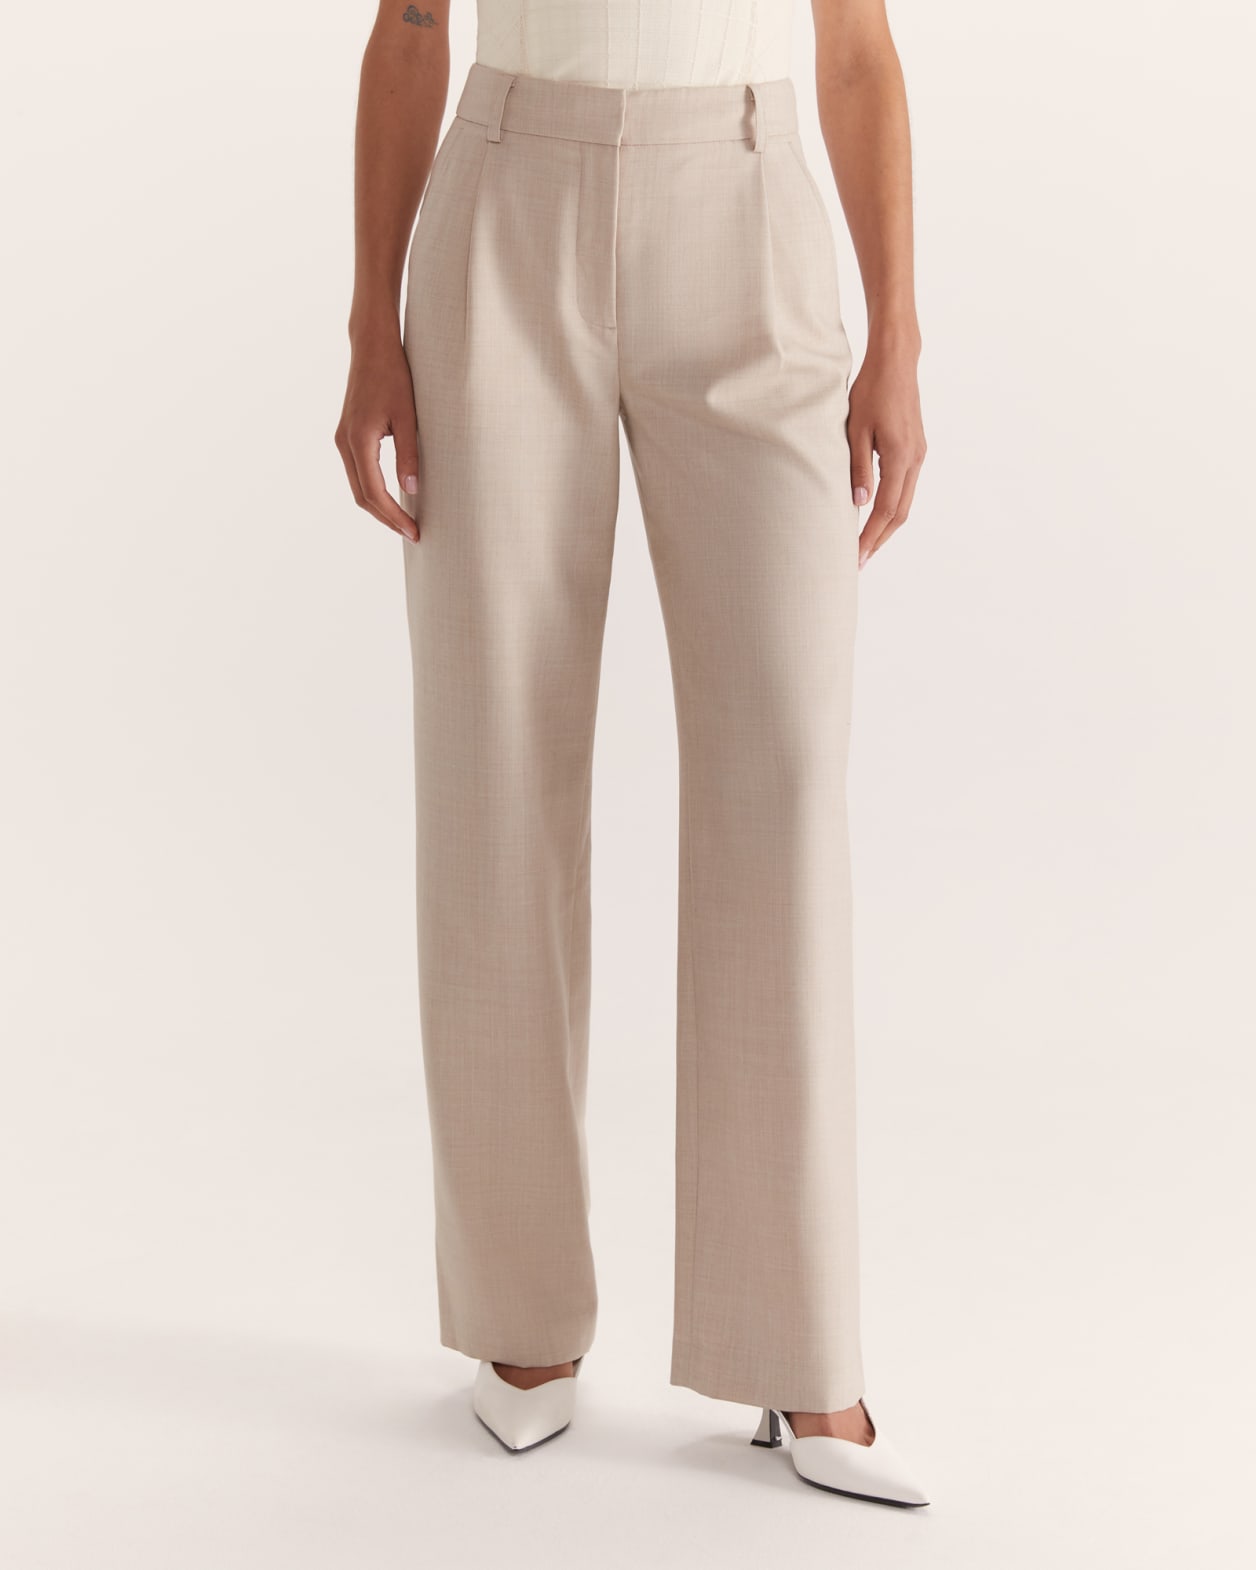 Hollie Pleat Front Pant in OATMEAL MELANGE